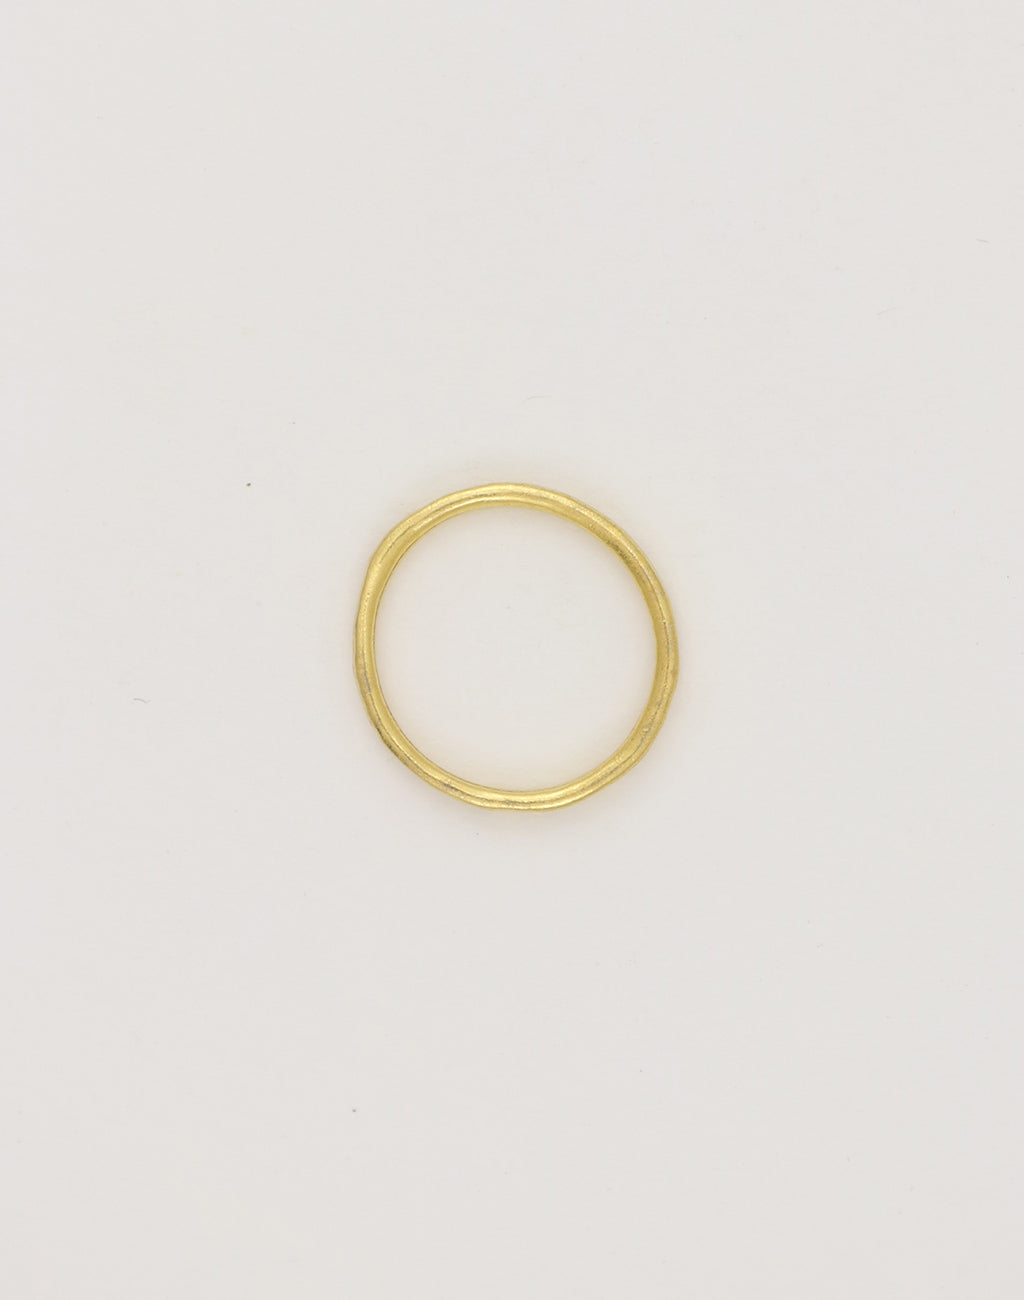 Hammered Ring, 21mm, (1pc)